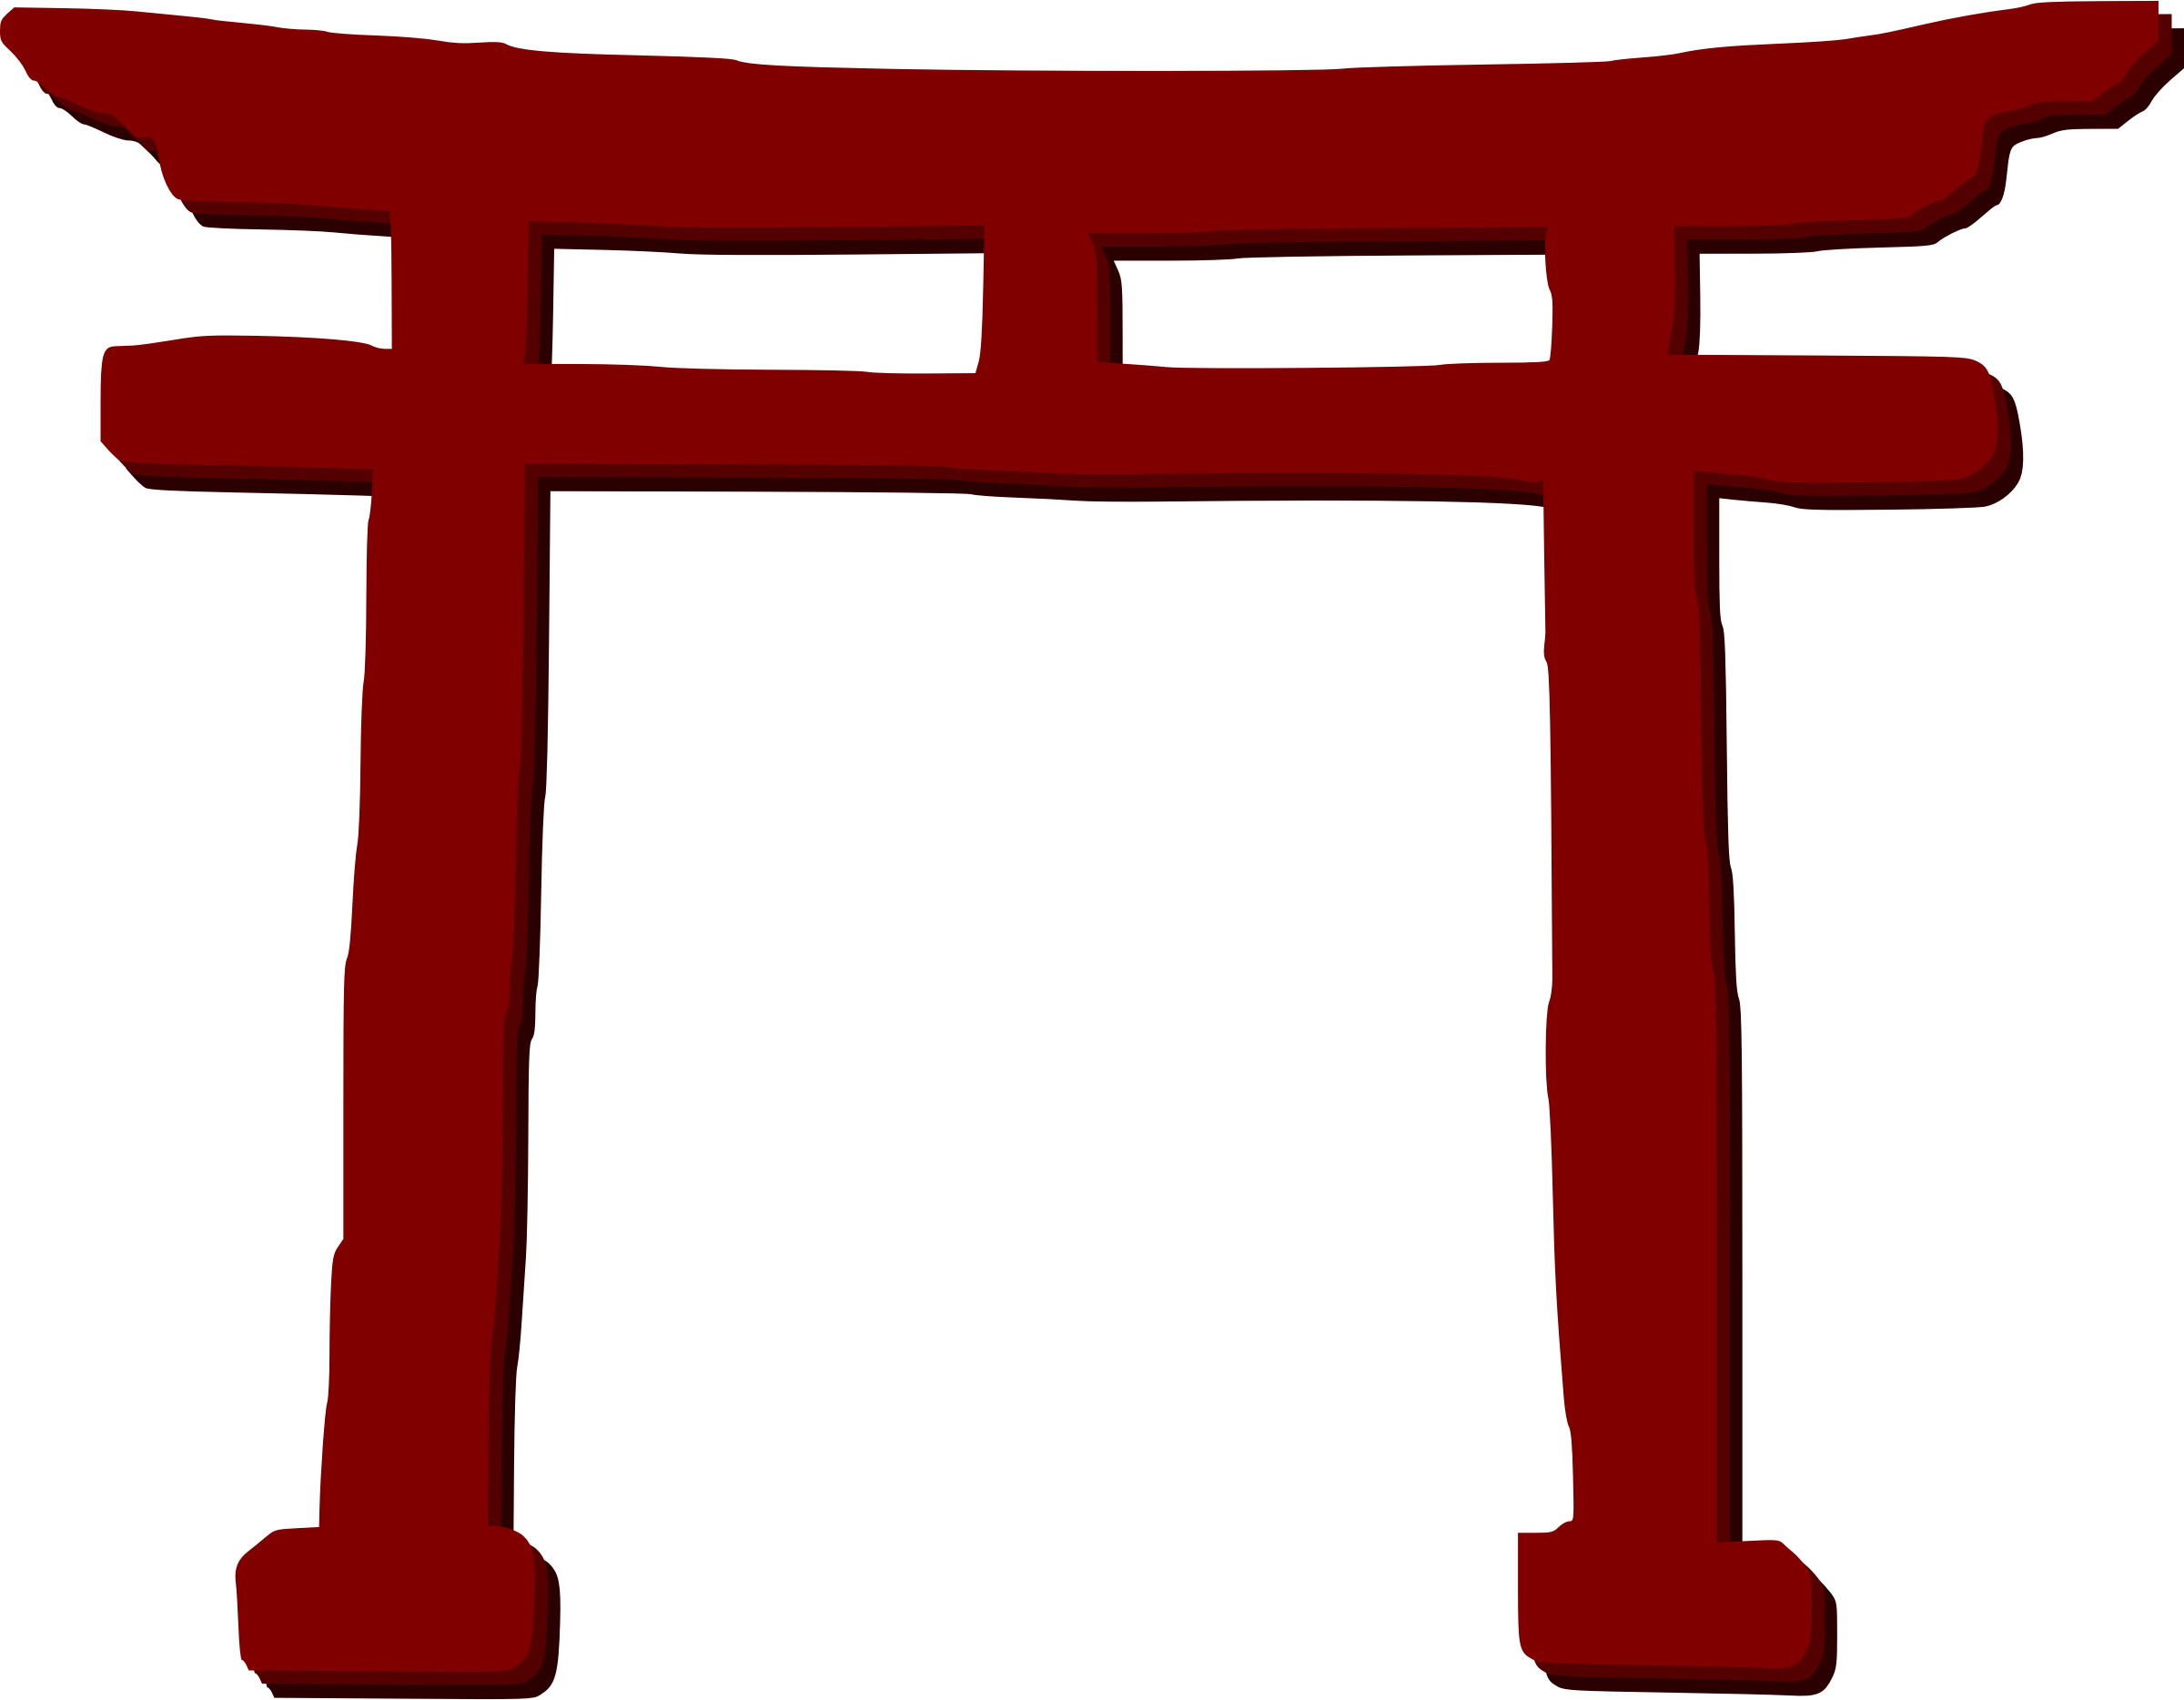 Download Torii Gate Png Images Transparent Gallery. Advertisement - Torii Gate, Transparent background PNG HD thumbnail